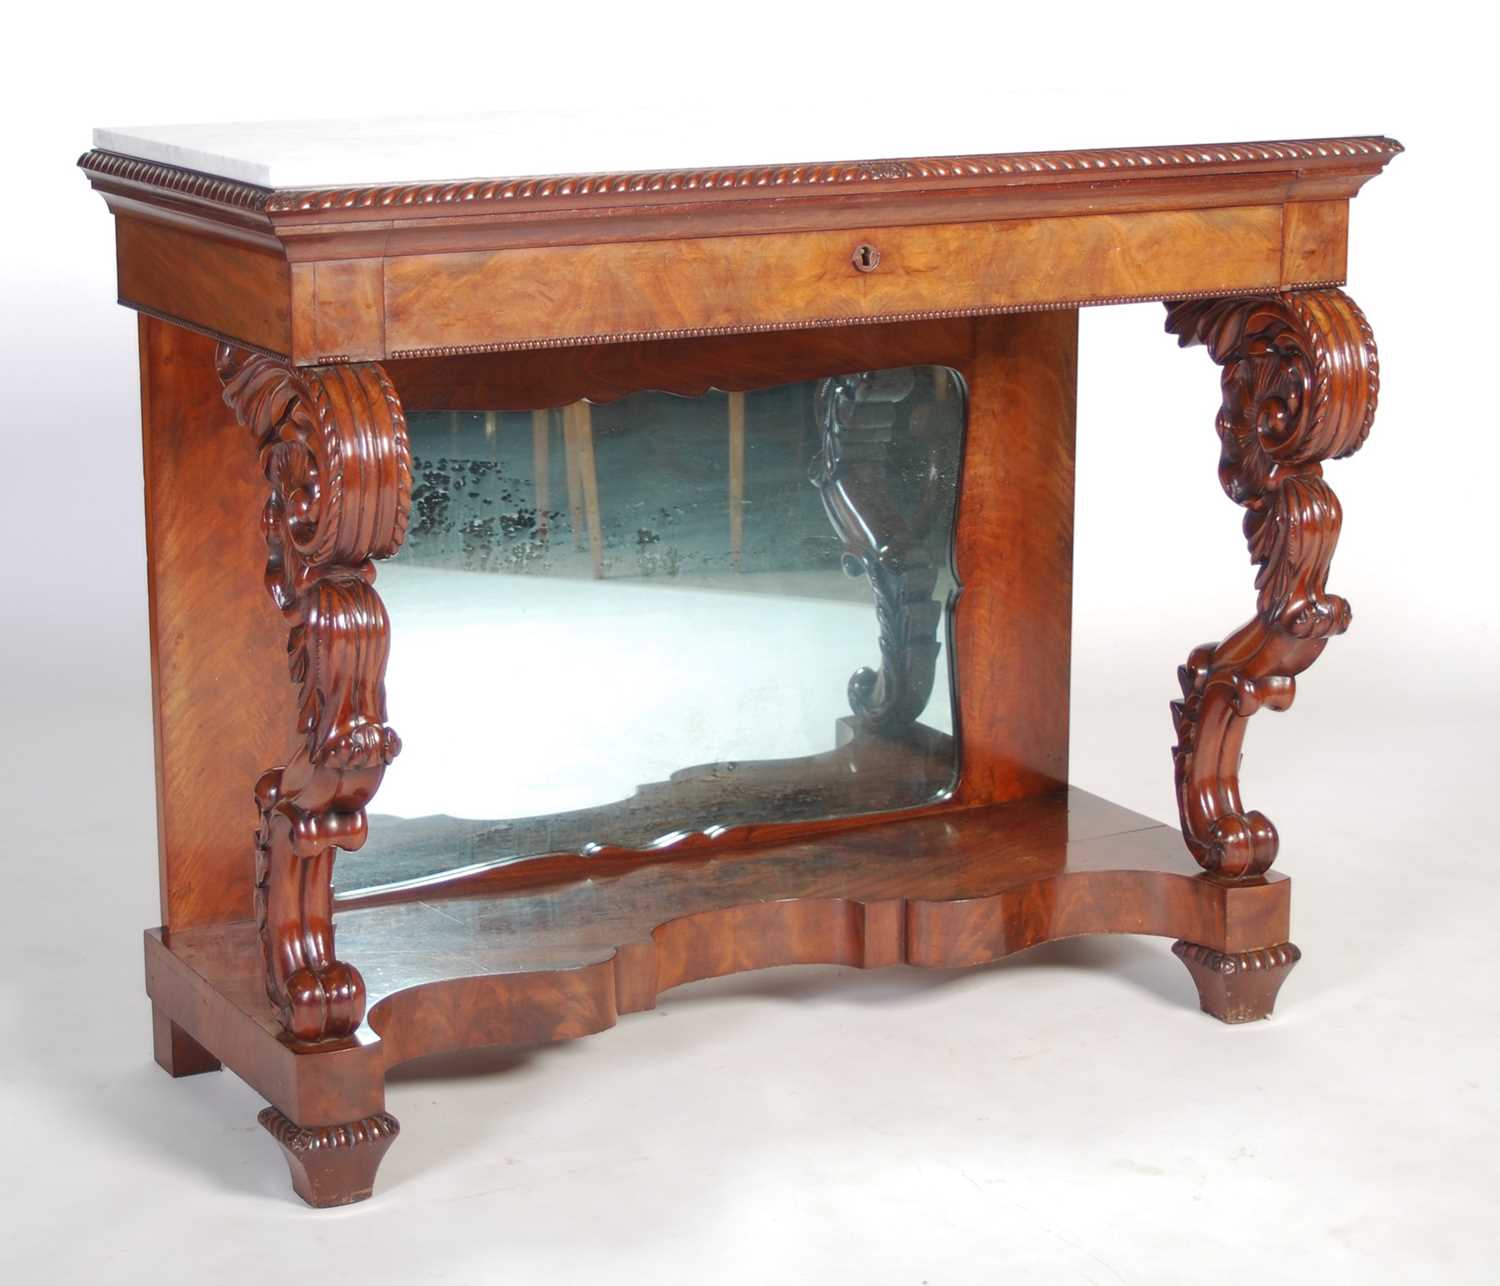 A 19th century French mahogany console table, the mottled white and grey rectangular marble top